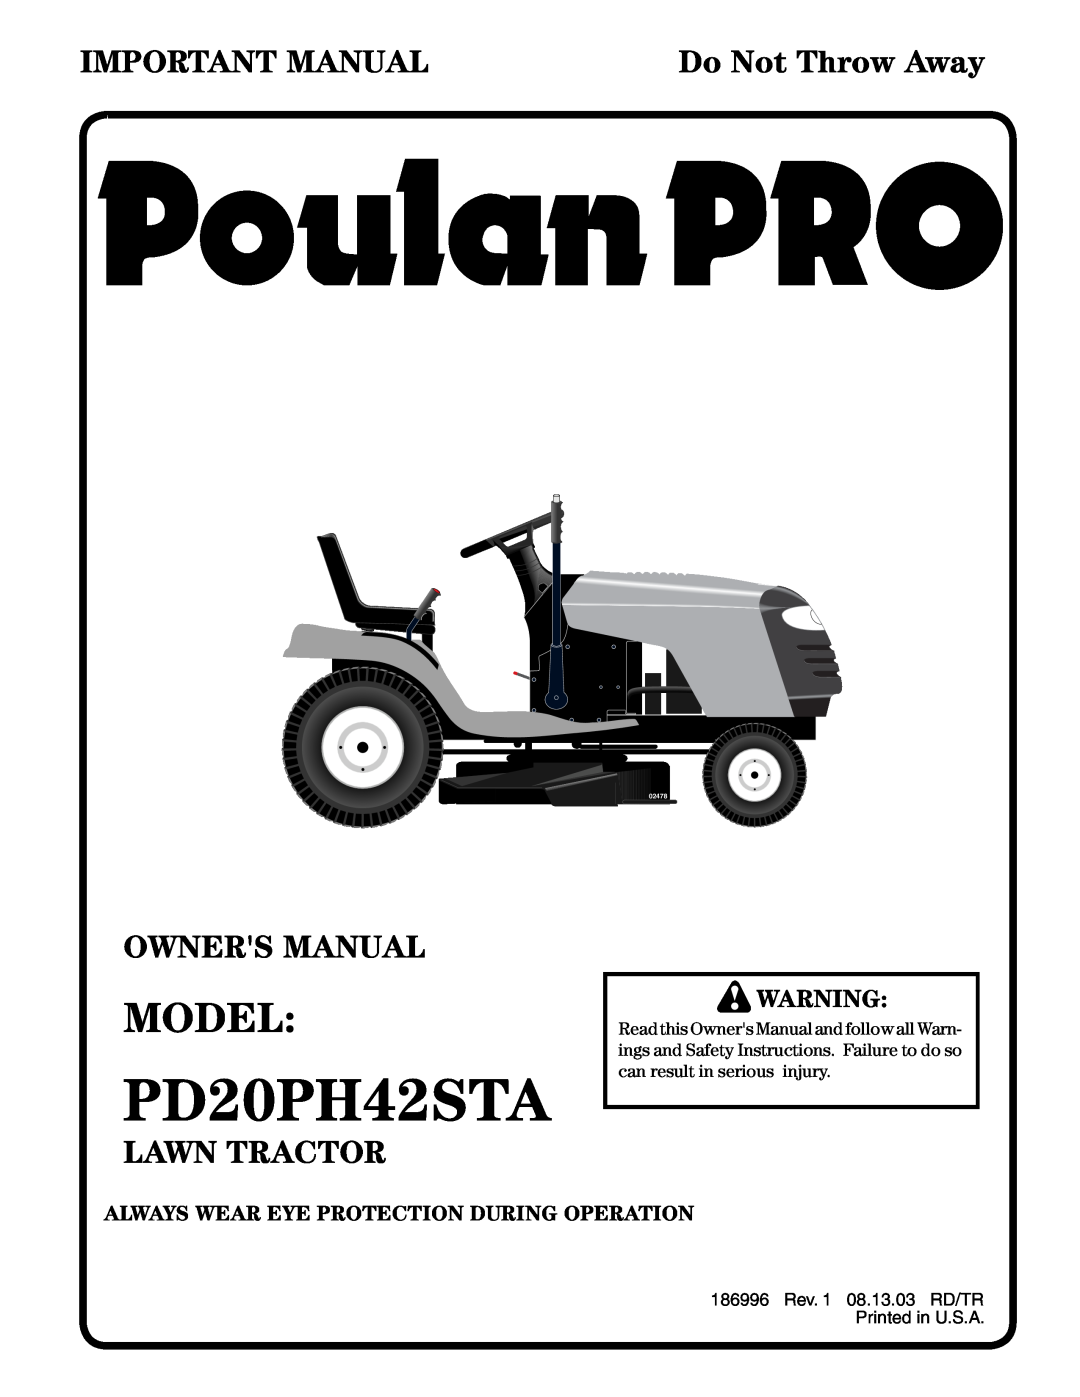 Poulan 186996, 954570925 owner manual Model, PD20PH42STA, Important Manual, Lawn Tractor, Do Not Throw Away, 02478 